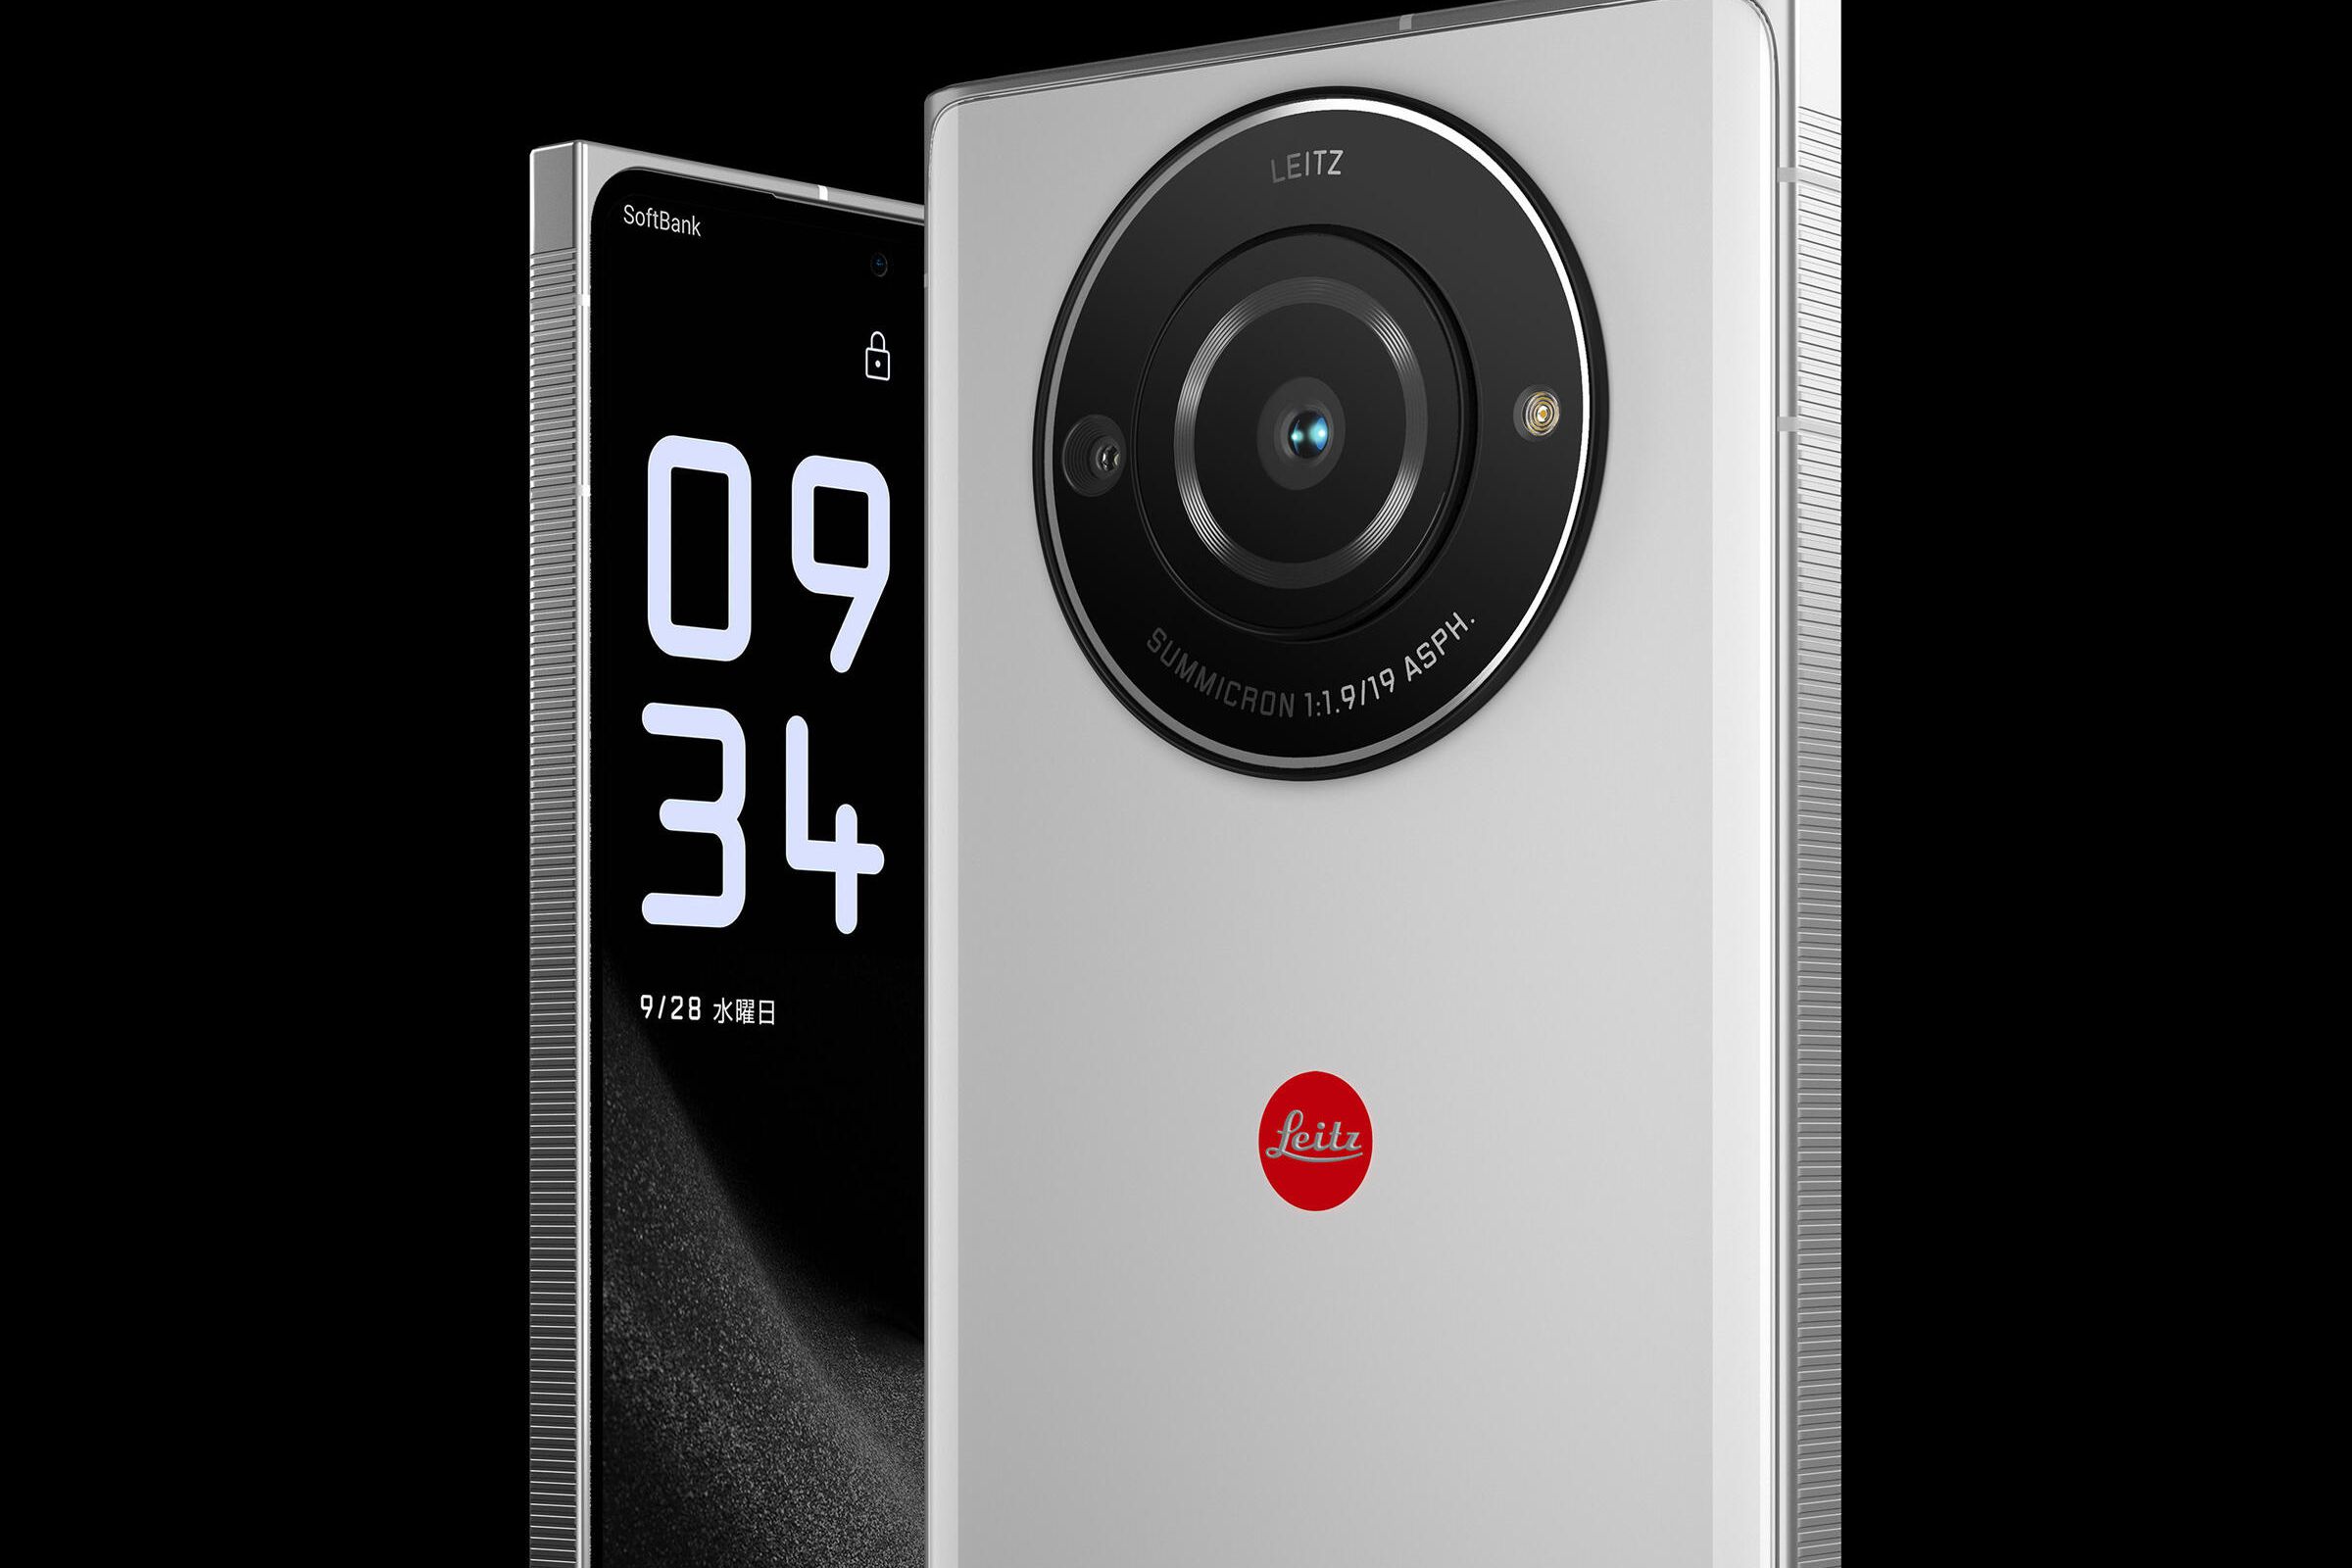 Render of the Leica Leitz Phone 2 rear and front panels.